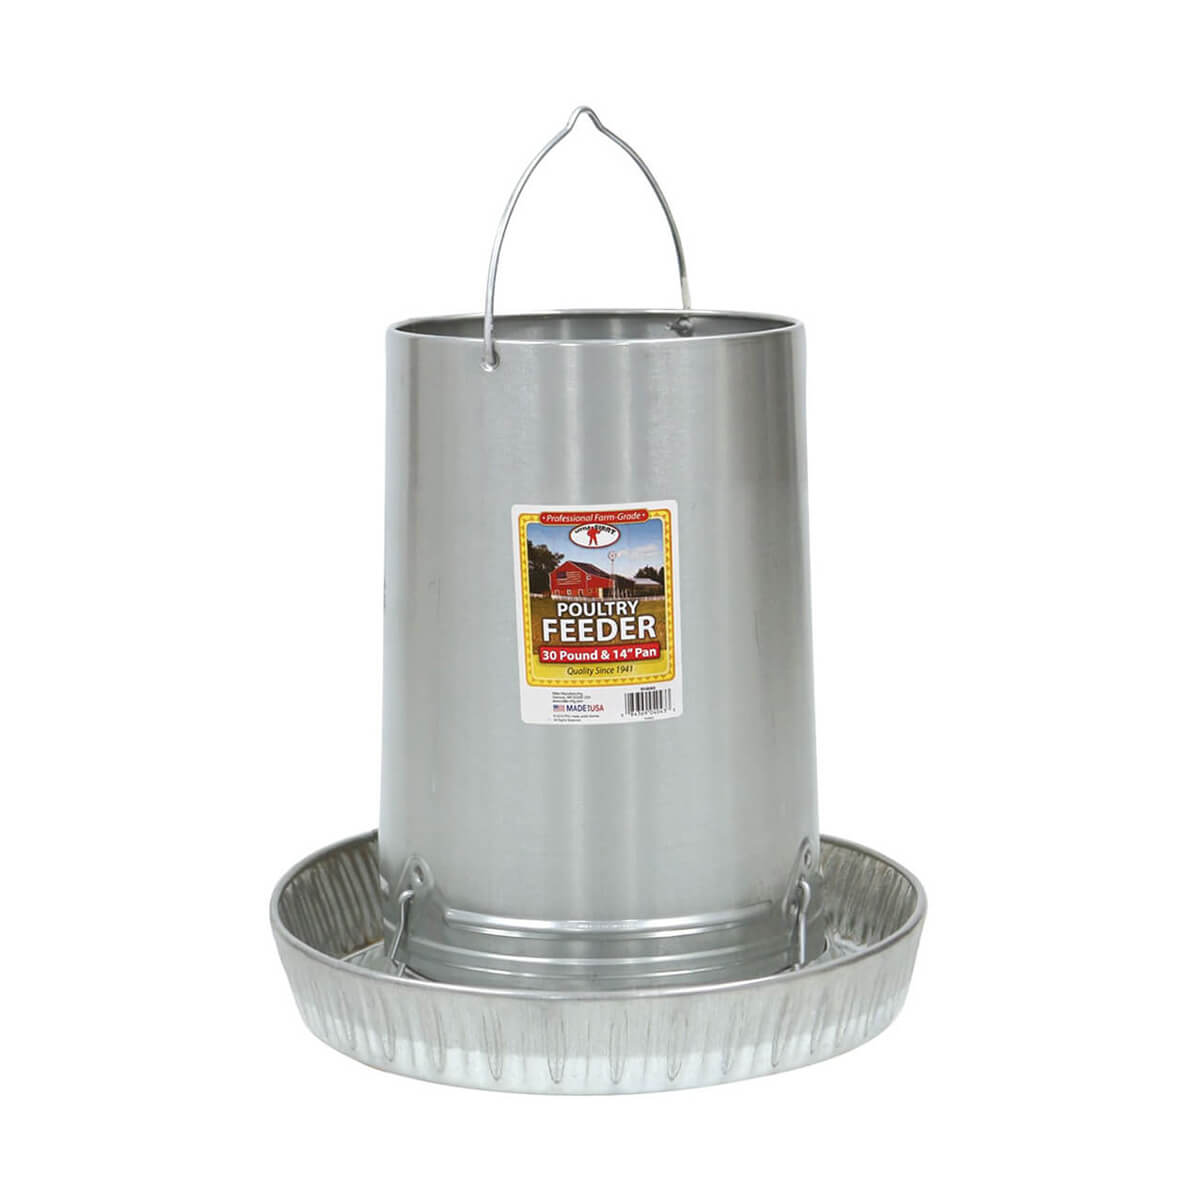 Hanging Poultry Feeders with Medium Pan - 50 lb Capacity